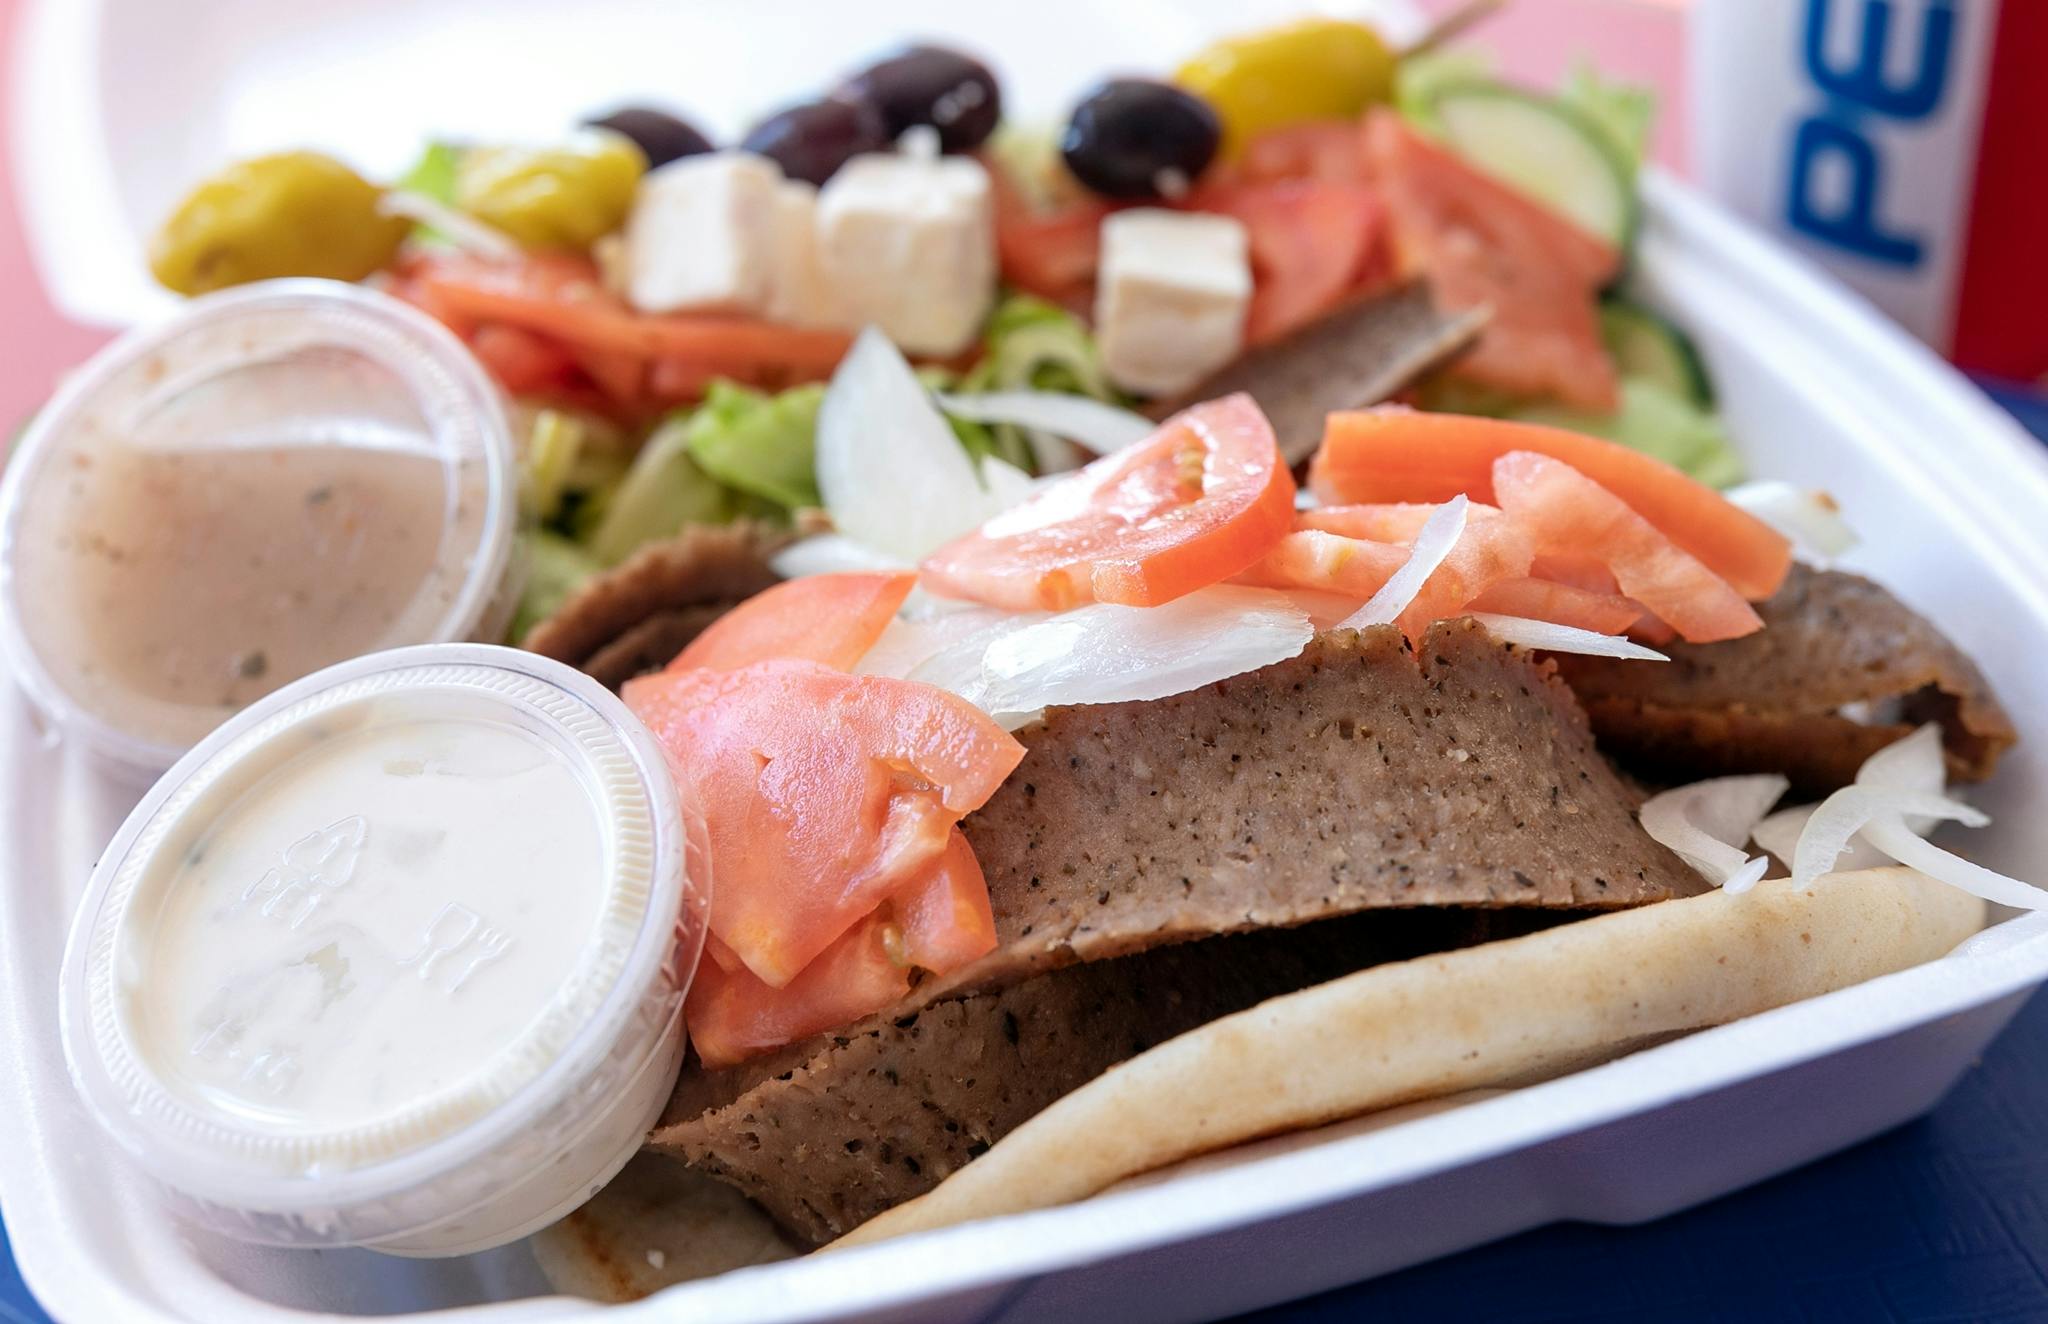 Gyro Plate from Niko's Gyros in Appleton, WI